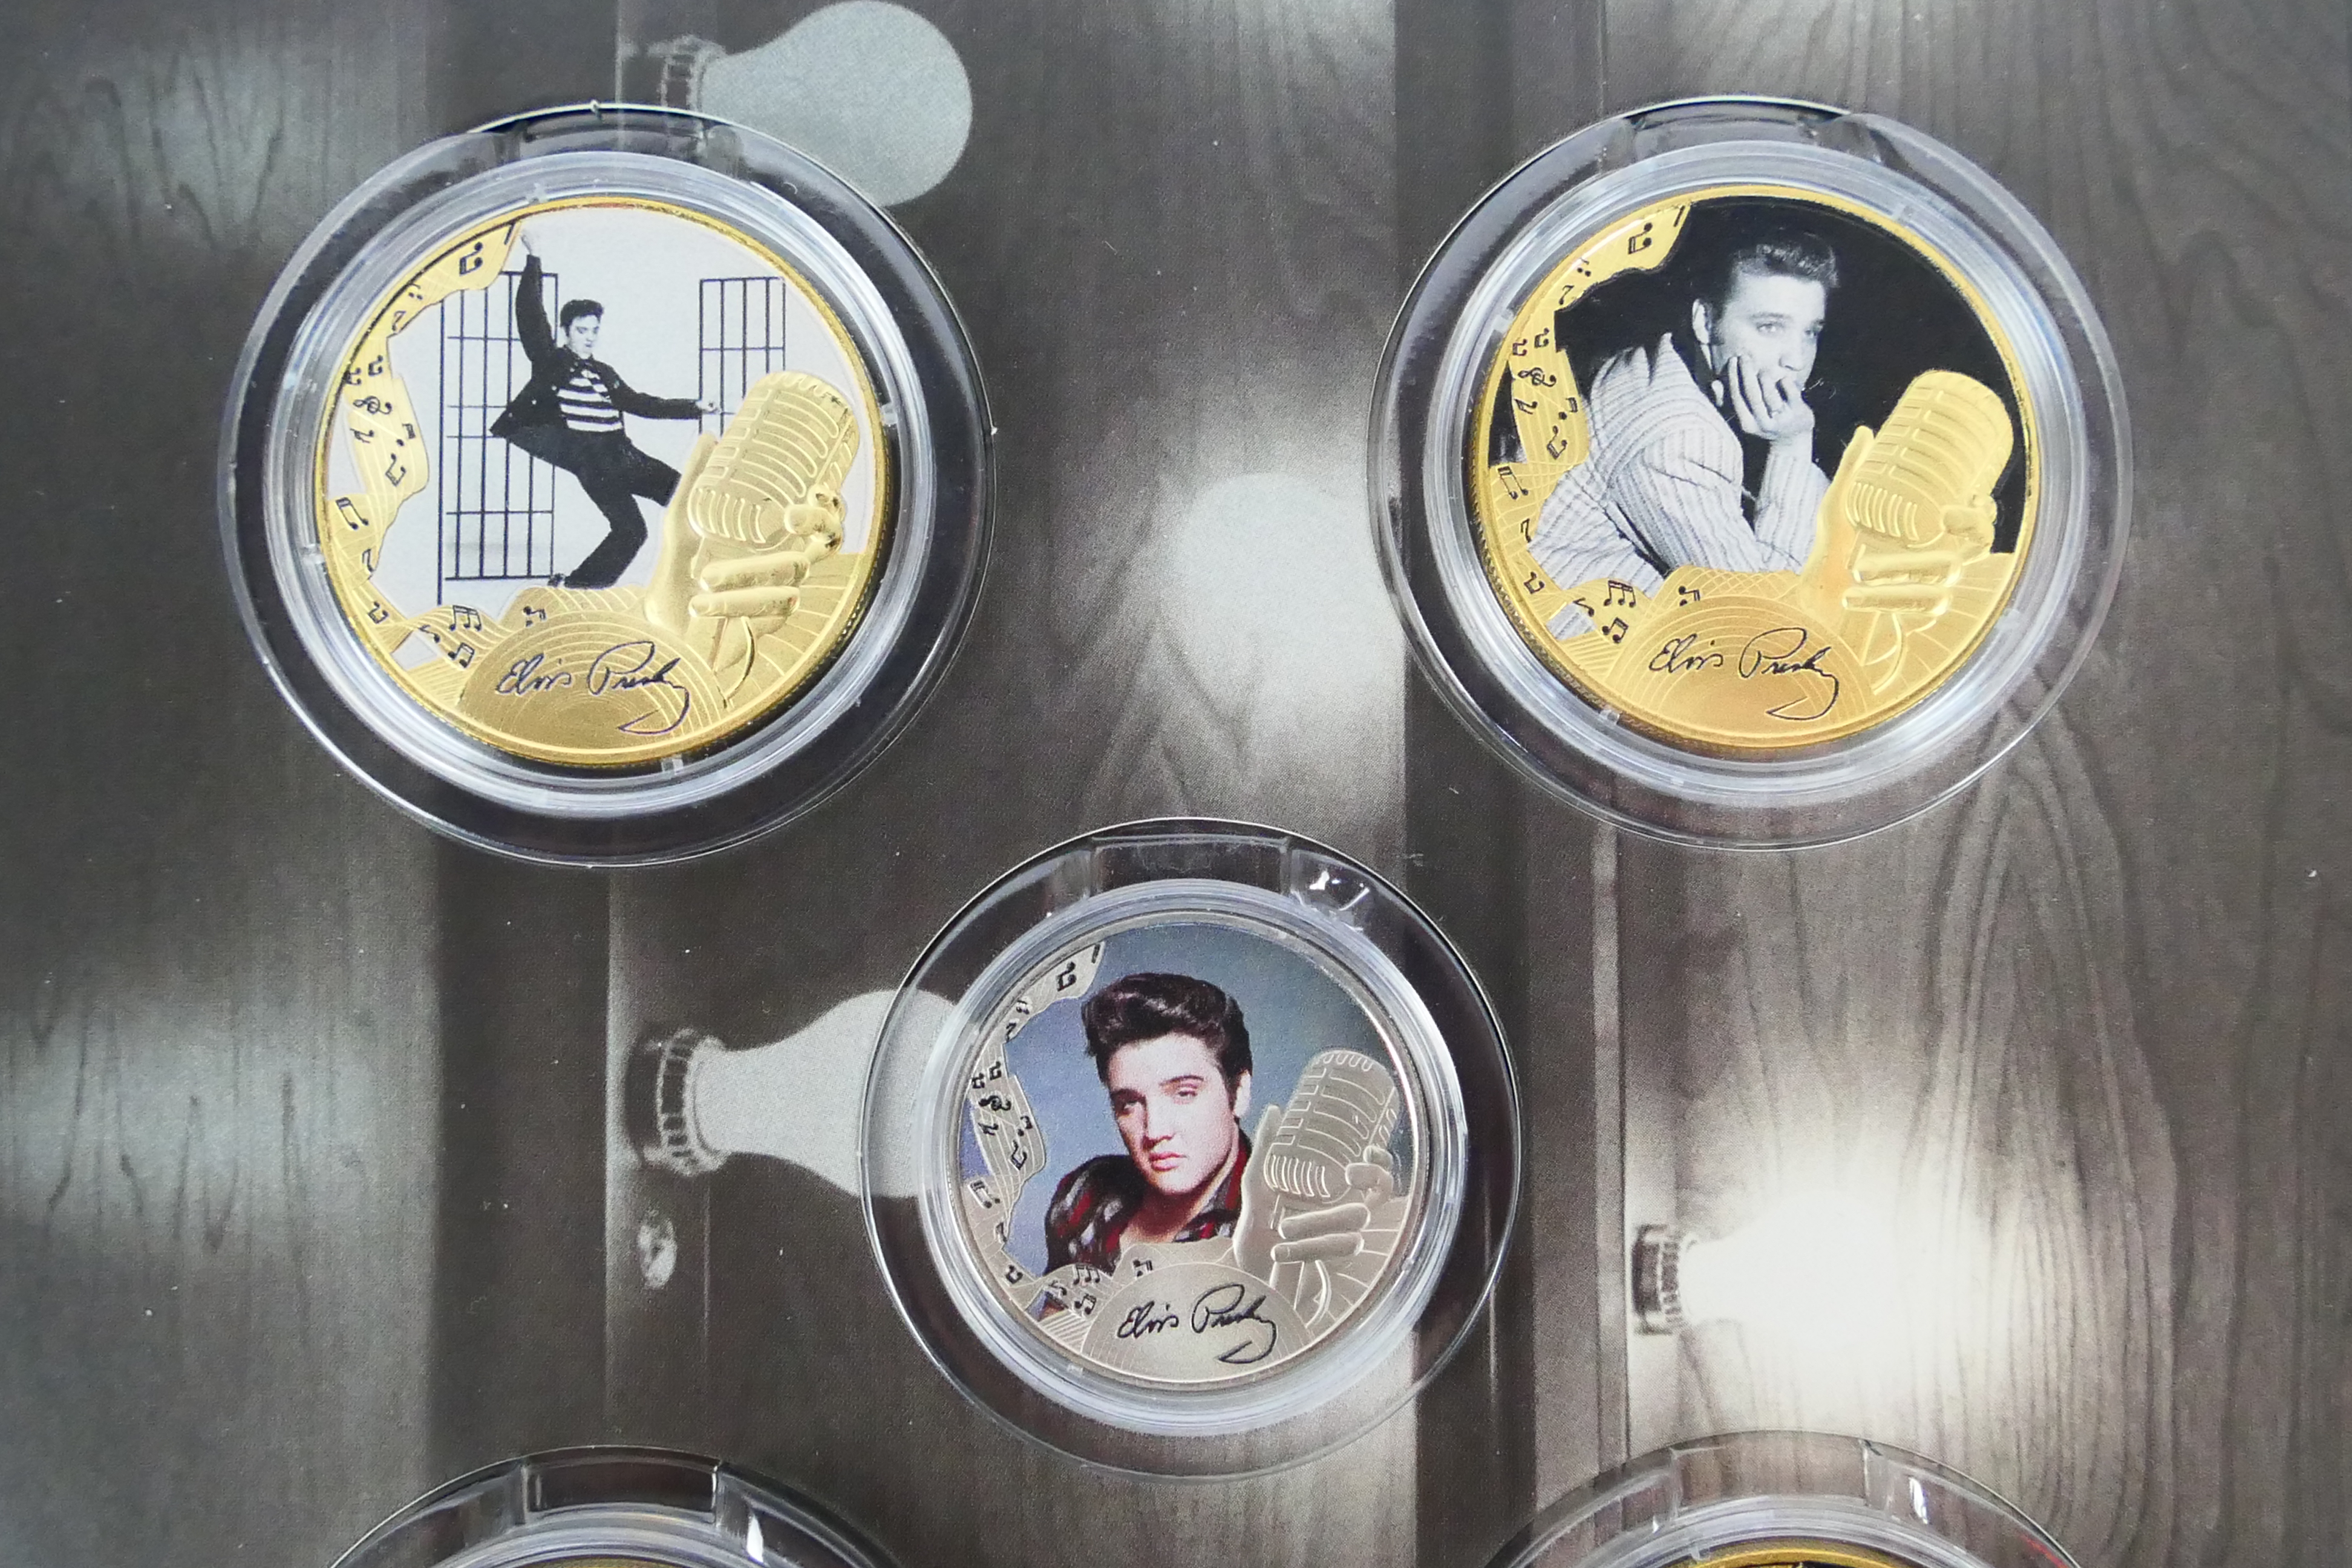 Elvis Presley - A London Mint Elvis related collector coin set, The King Of Rock And Roll, - Image 3 of 7